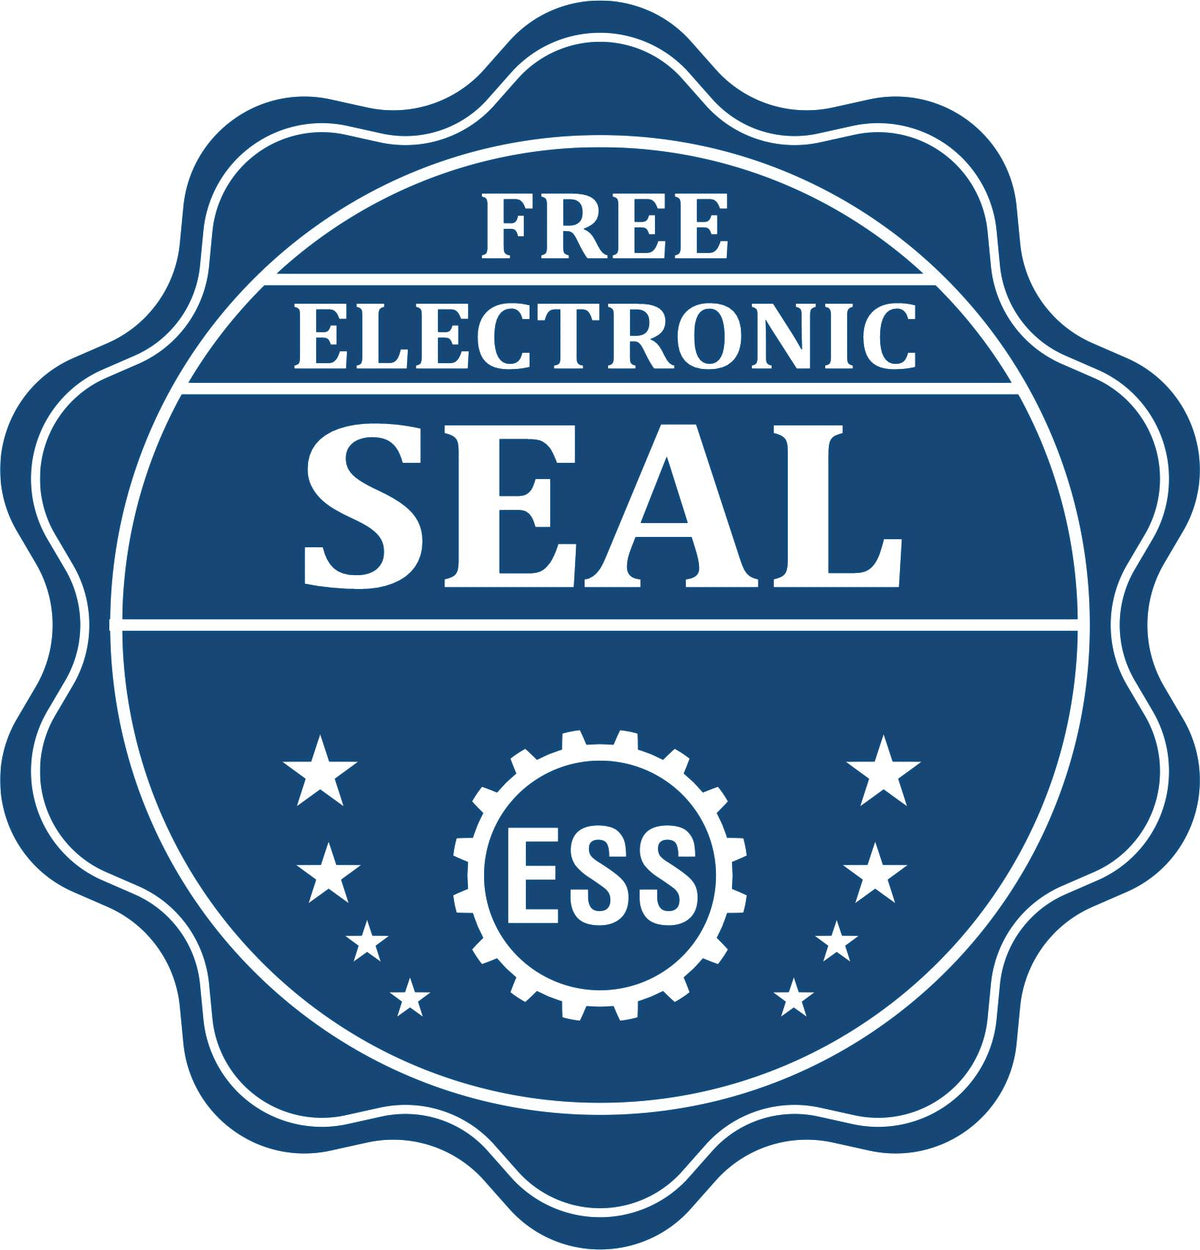 A badge showing a free electronic seal for the Soft Indiana Professional Geologist Seal with stars and the ESS gear on the emblem.